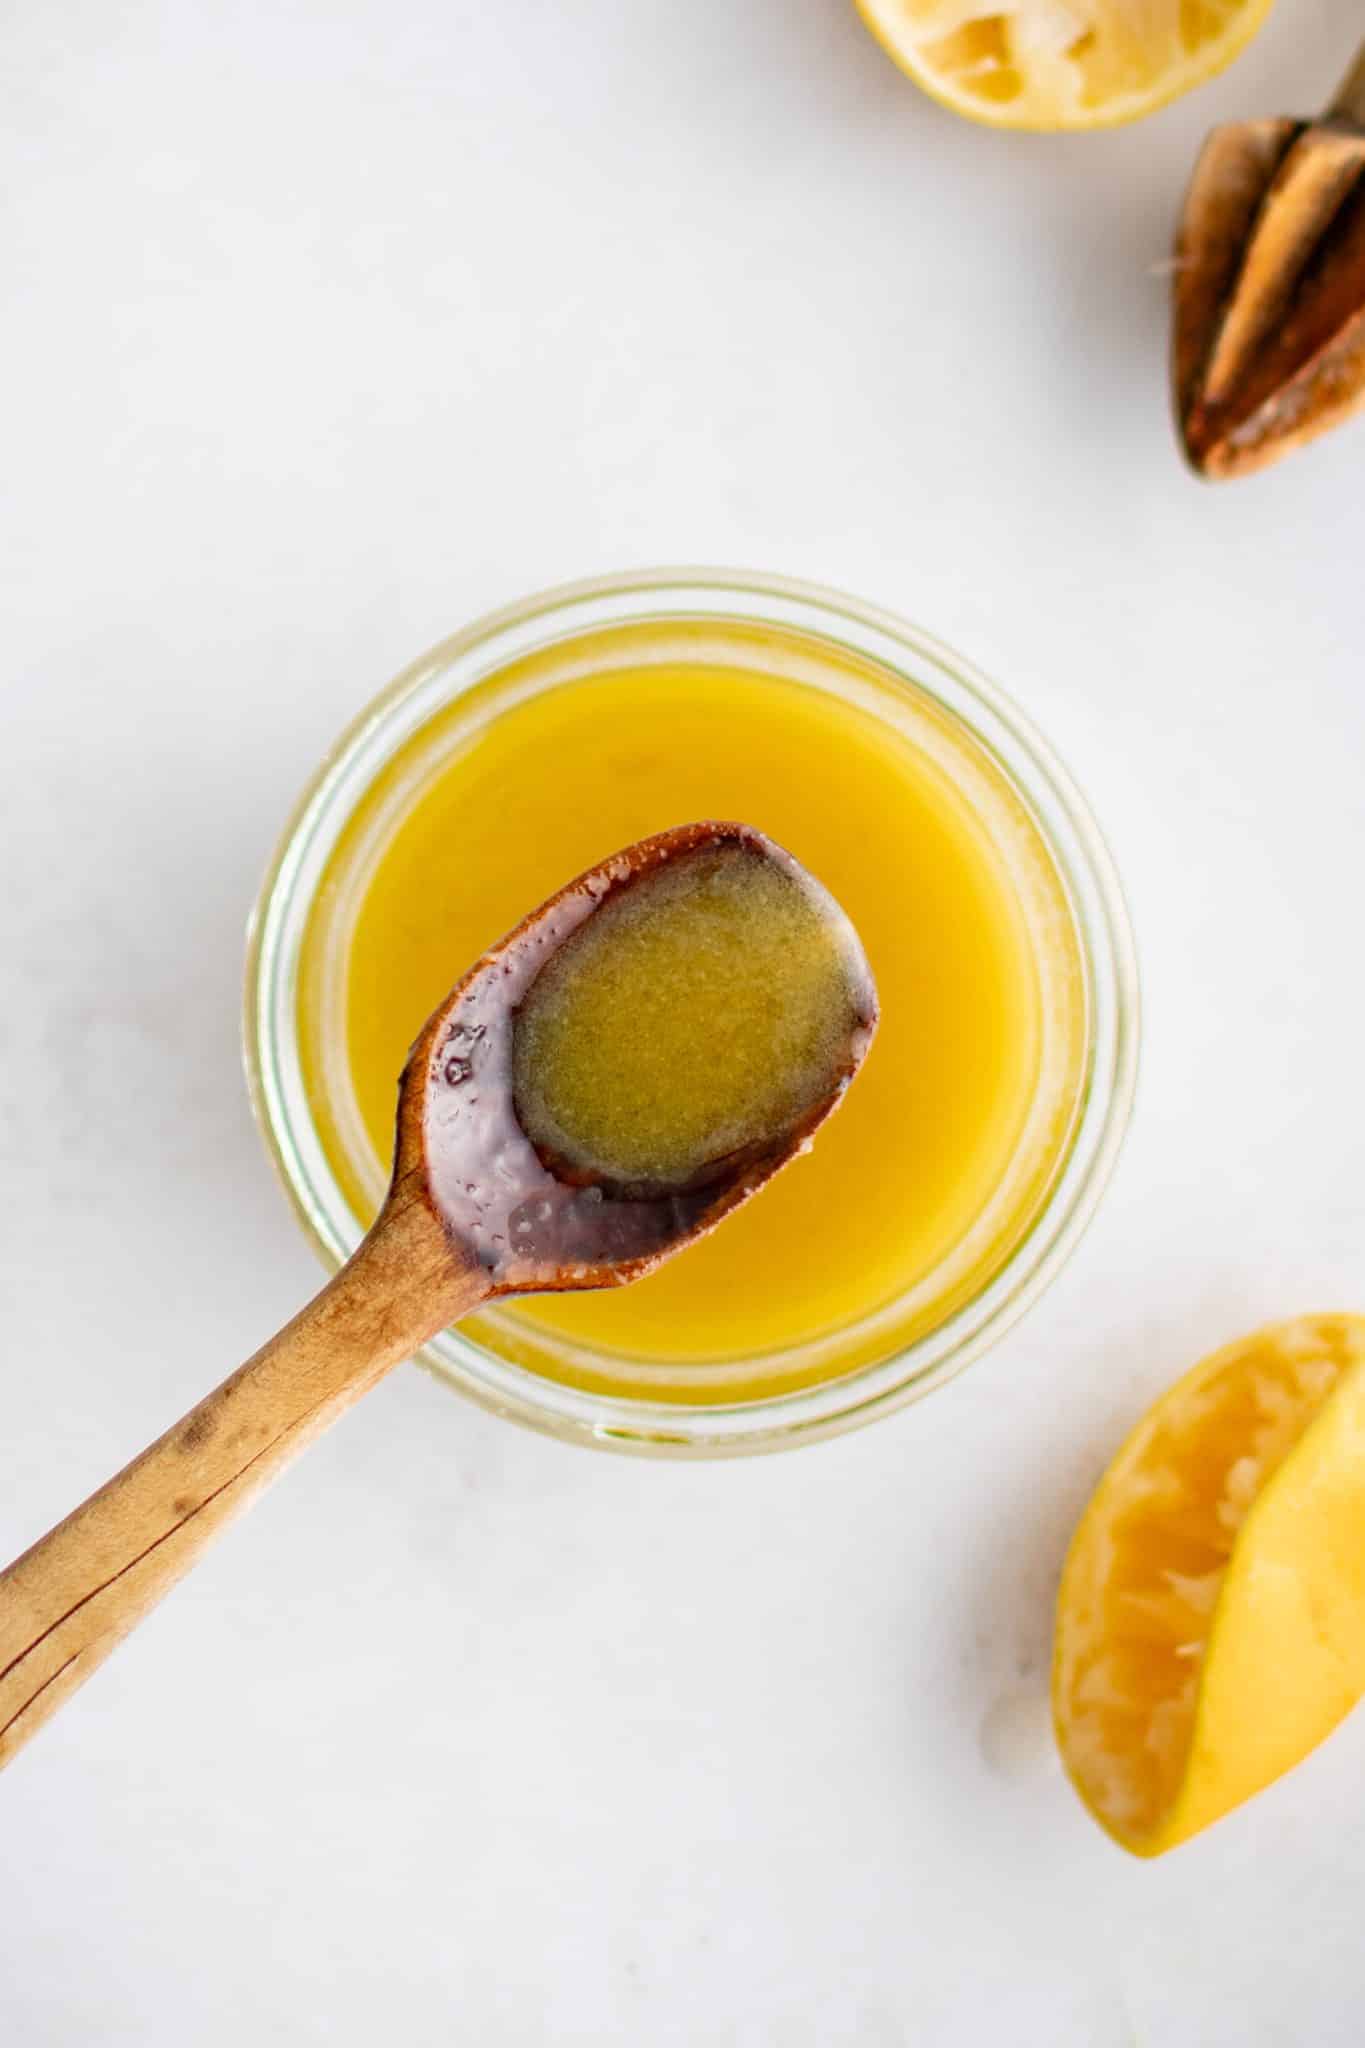 Small wooden spoon in a glass jar filled with golden yellow champagne vinaigrette.